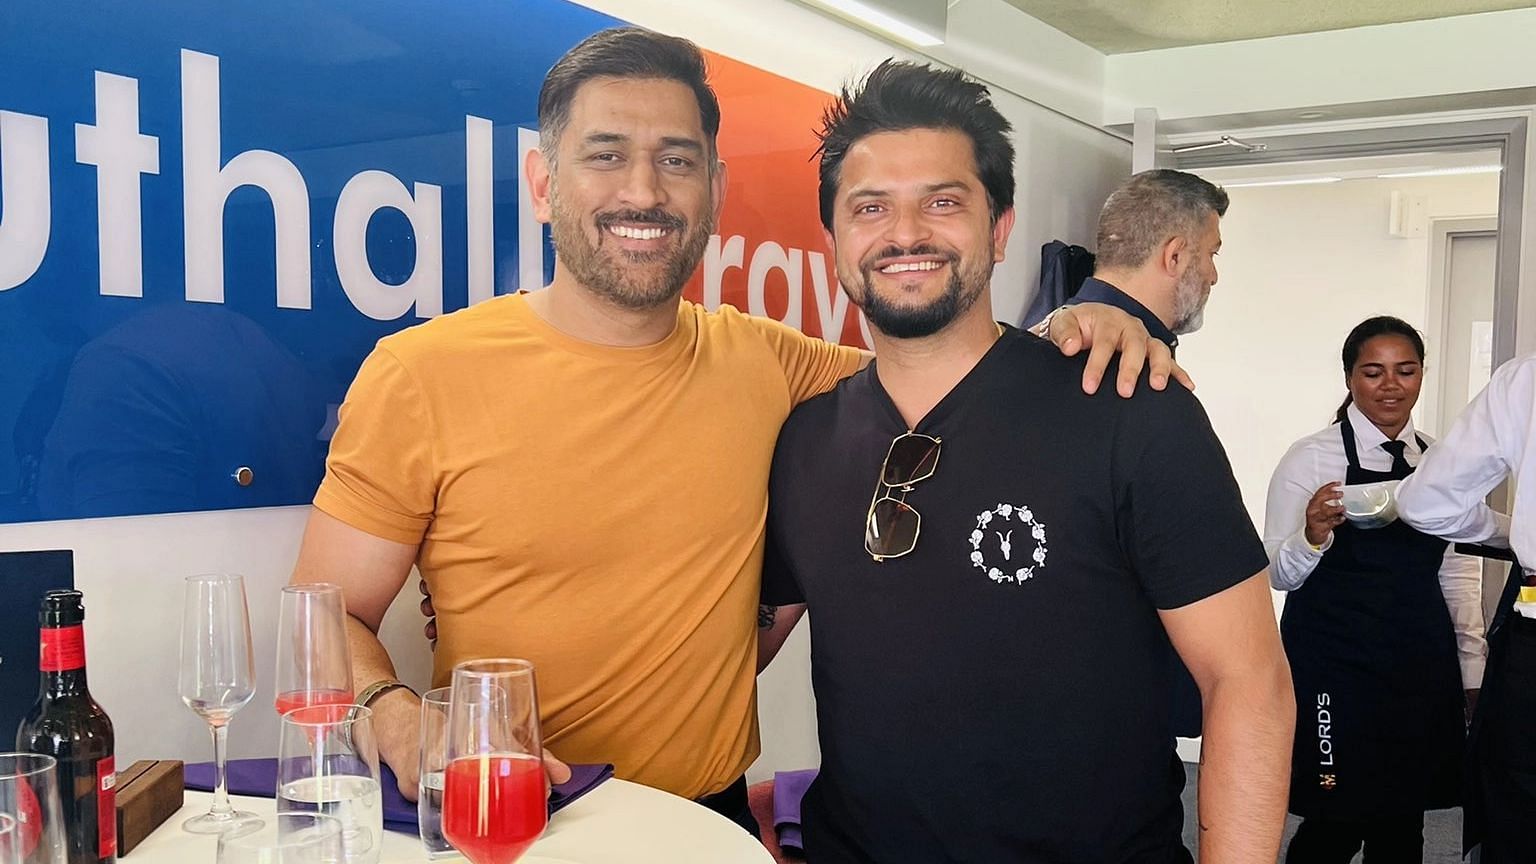 <div class="paragraphs"><p>Former Indian cricketers MS Dhoni and Suresh Raina reunited once again at Lord's on Thursday.&nbsp;&nbsp;</p></div>